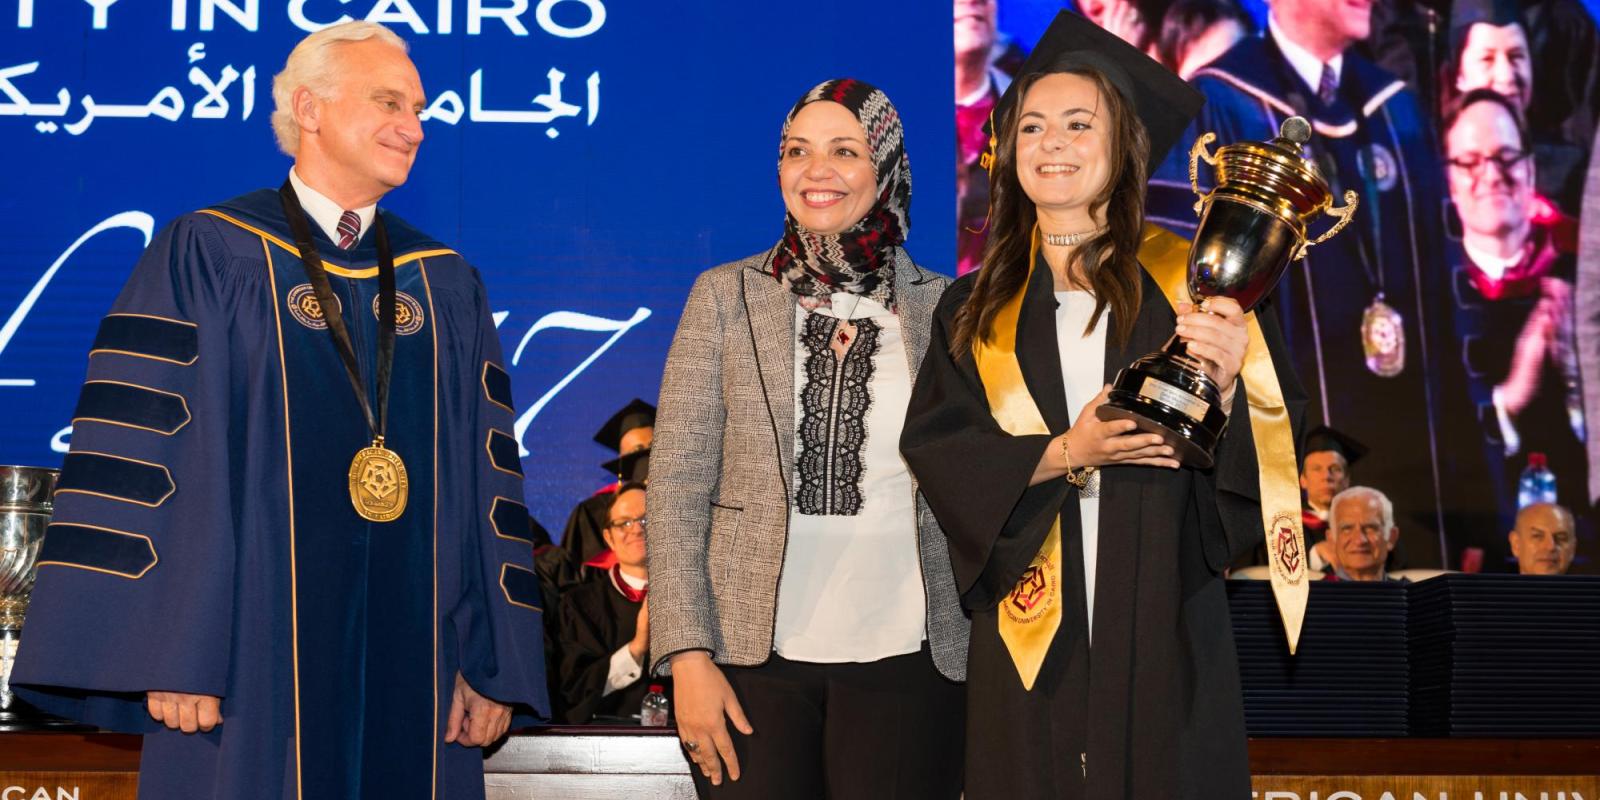 Dina Meshref was awarded the Omar Mohsen Athletic Achievement Cup at this year's undergraduate commencement ceremony for her impressive athletic achievements as a student